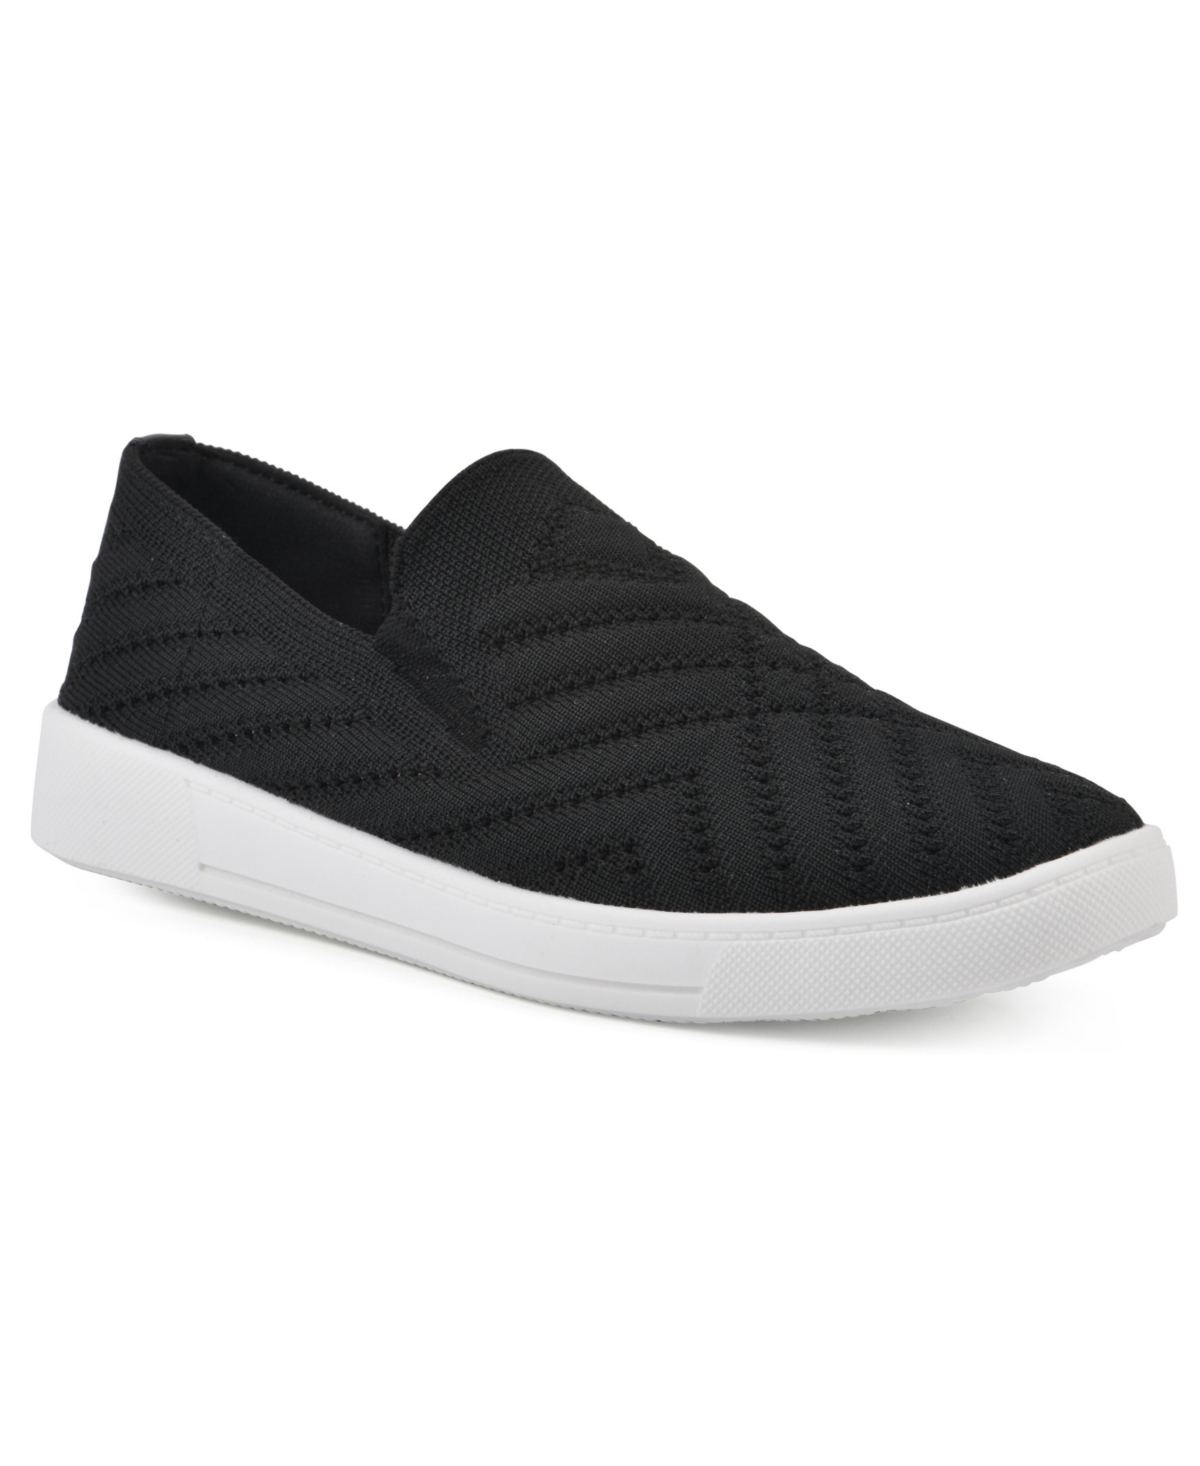 White Mountain Upbear Slip On Sneakers In Black Fabric